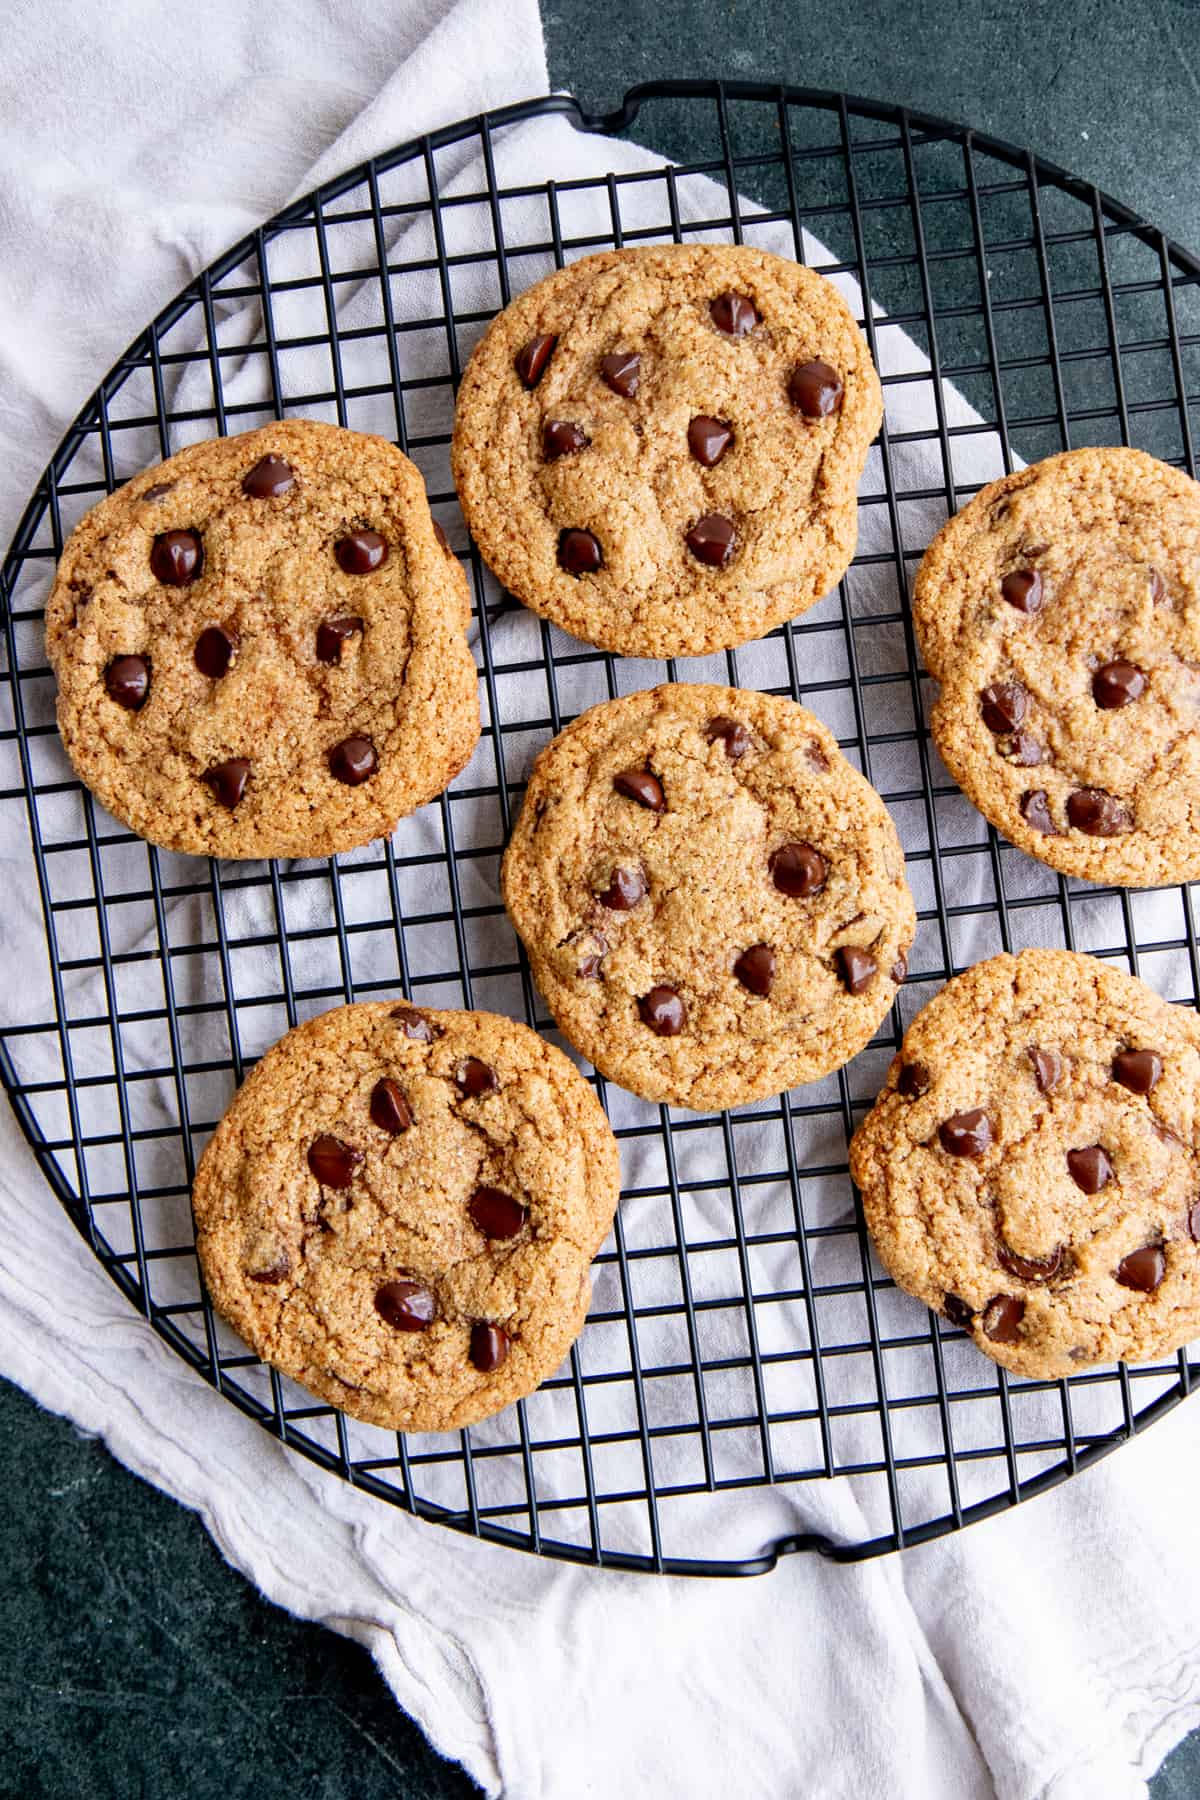 Six chocolate chip cookies sit on a round wire cooling rack.